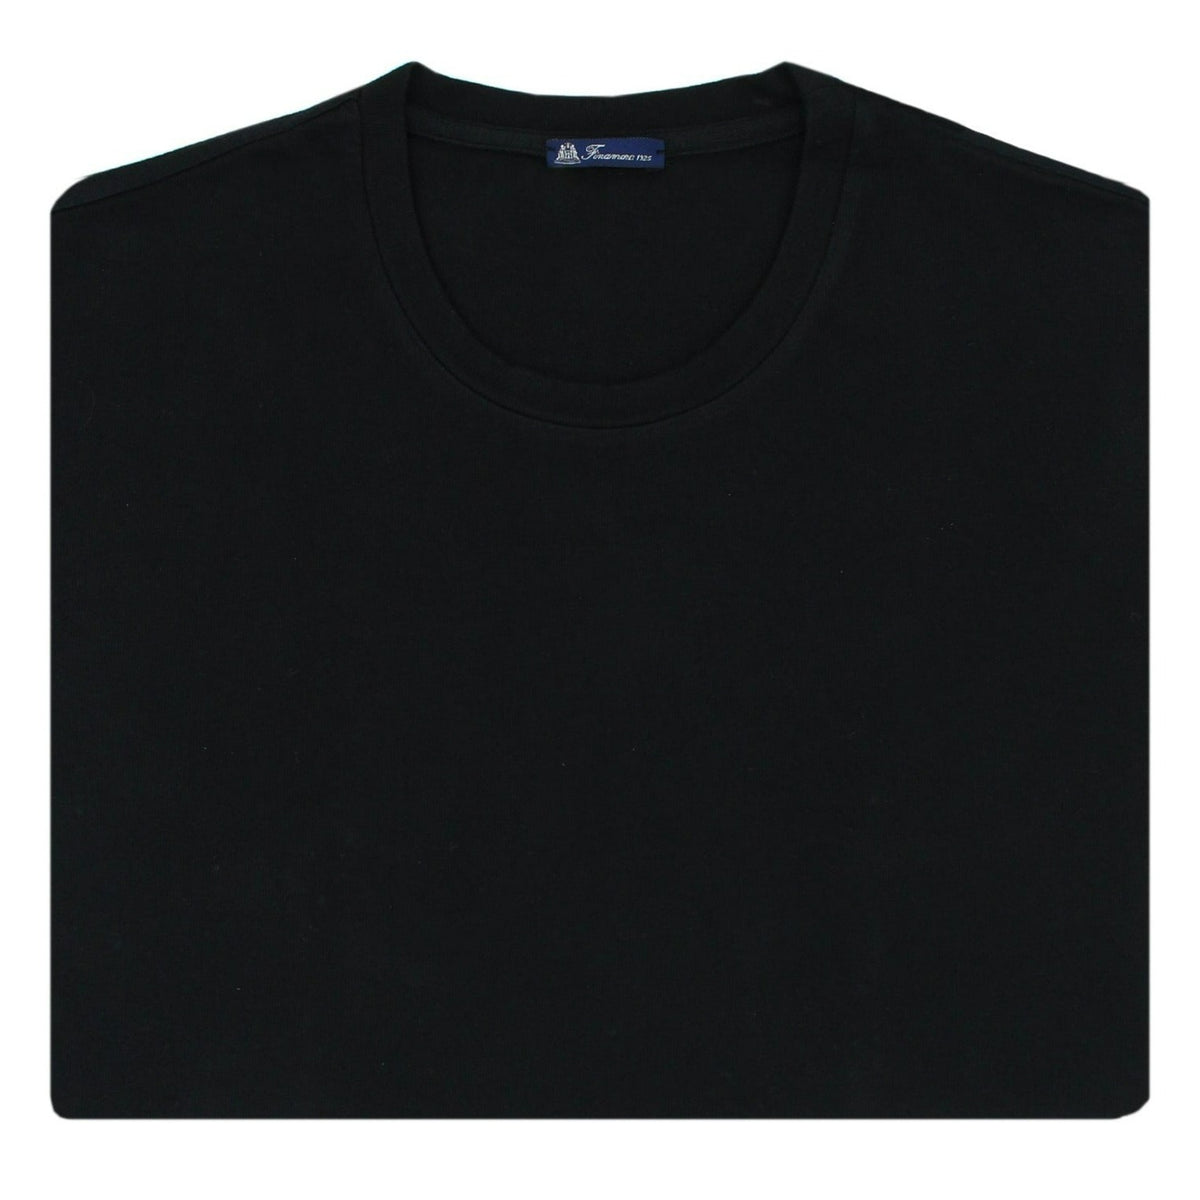 Dark garment dyed cotton T-shirt with Finamore 1925 logo